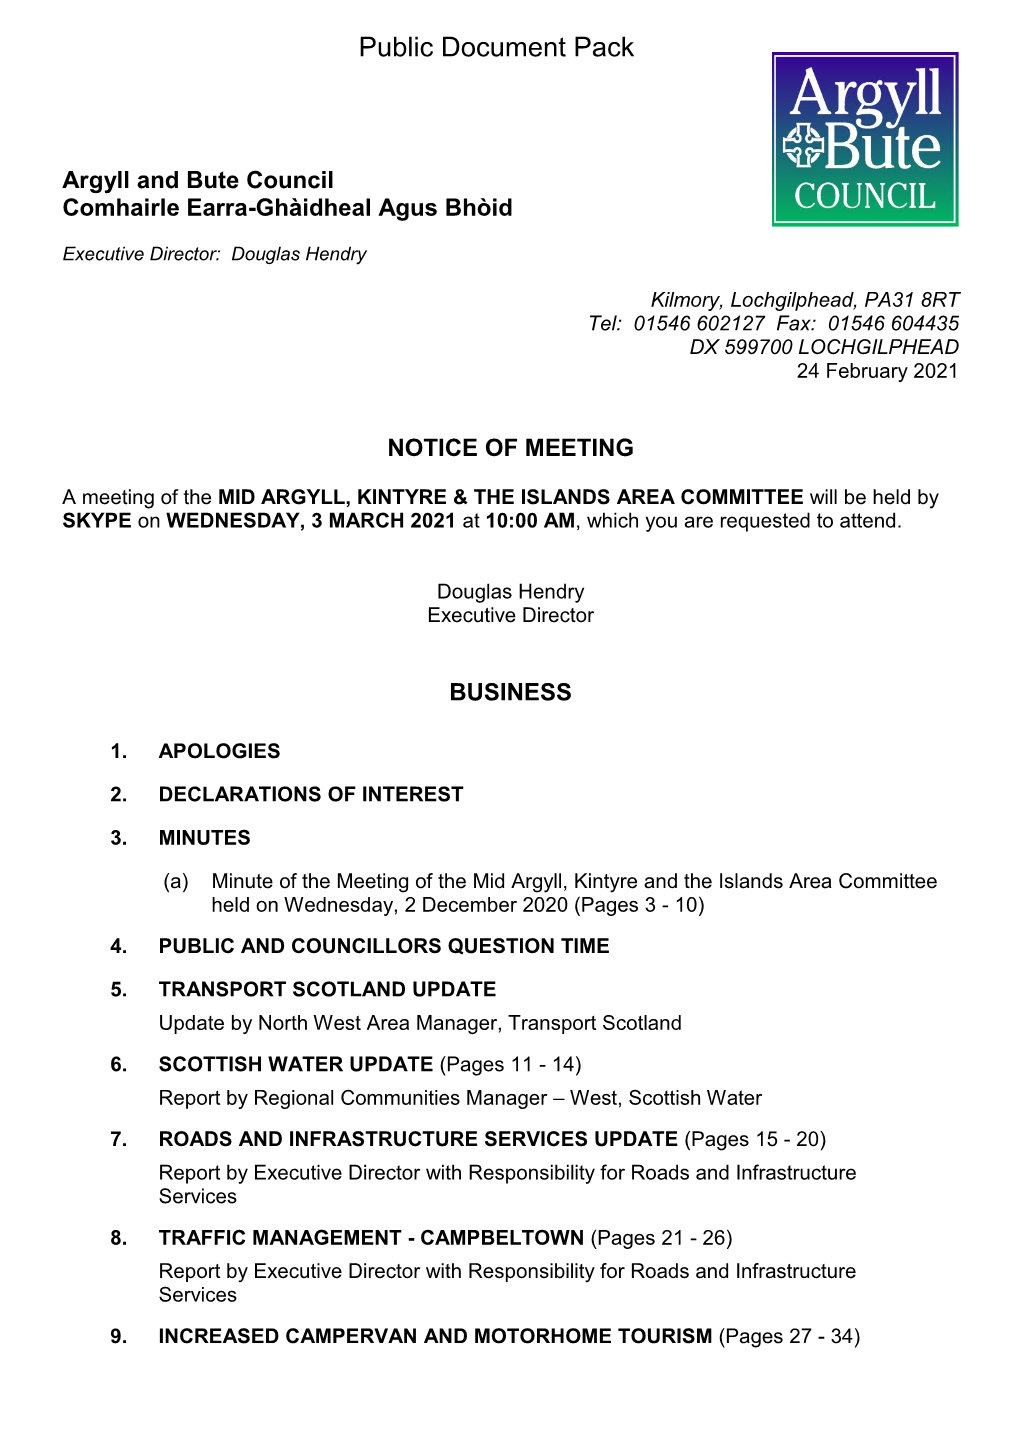 (Public Pack)Agenda Document for Mid Argyll, Kintyre & the Islands